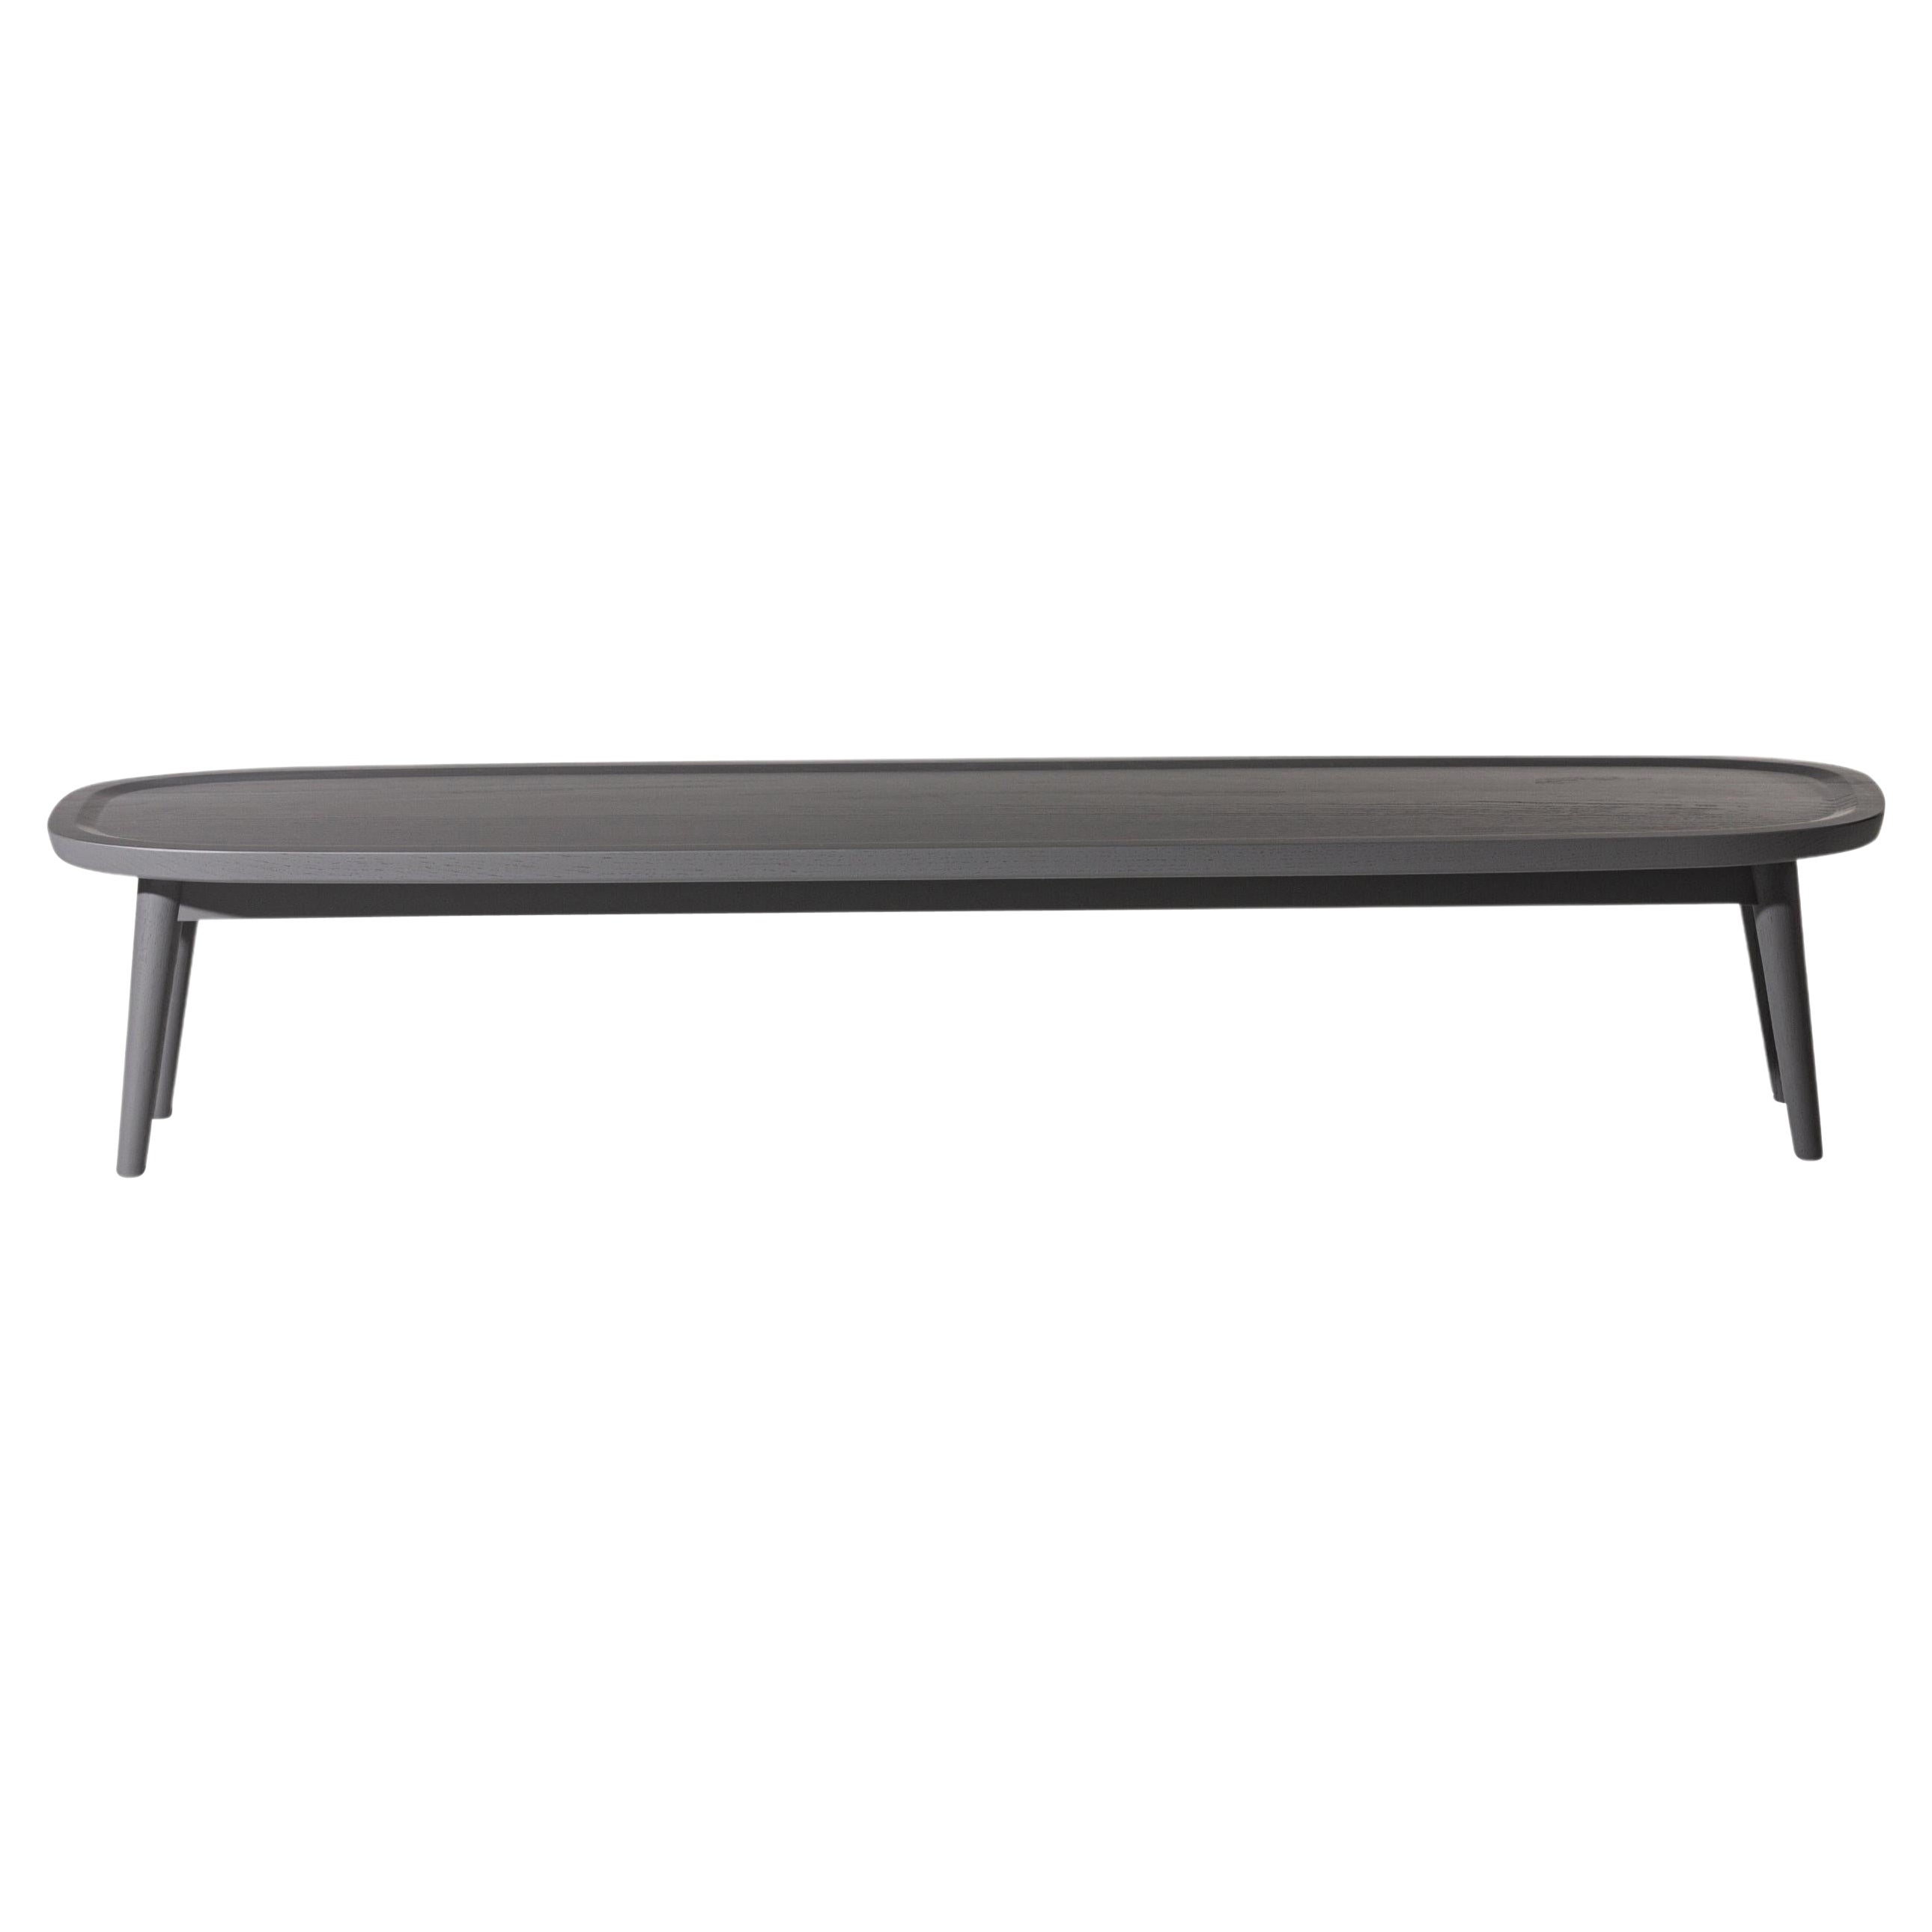 Gervasoni Large Brick Oval Coffee Table in Grey Lacquered Oak by Paola Navone For Sale